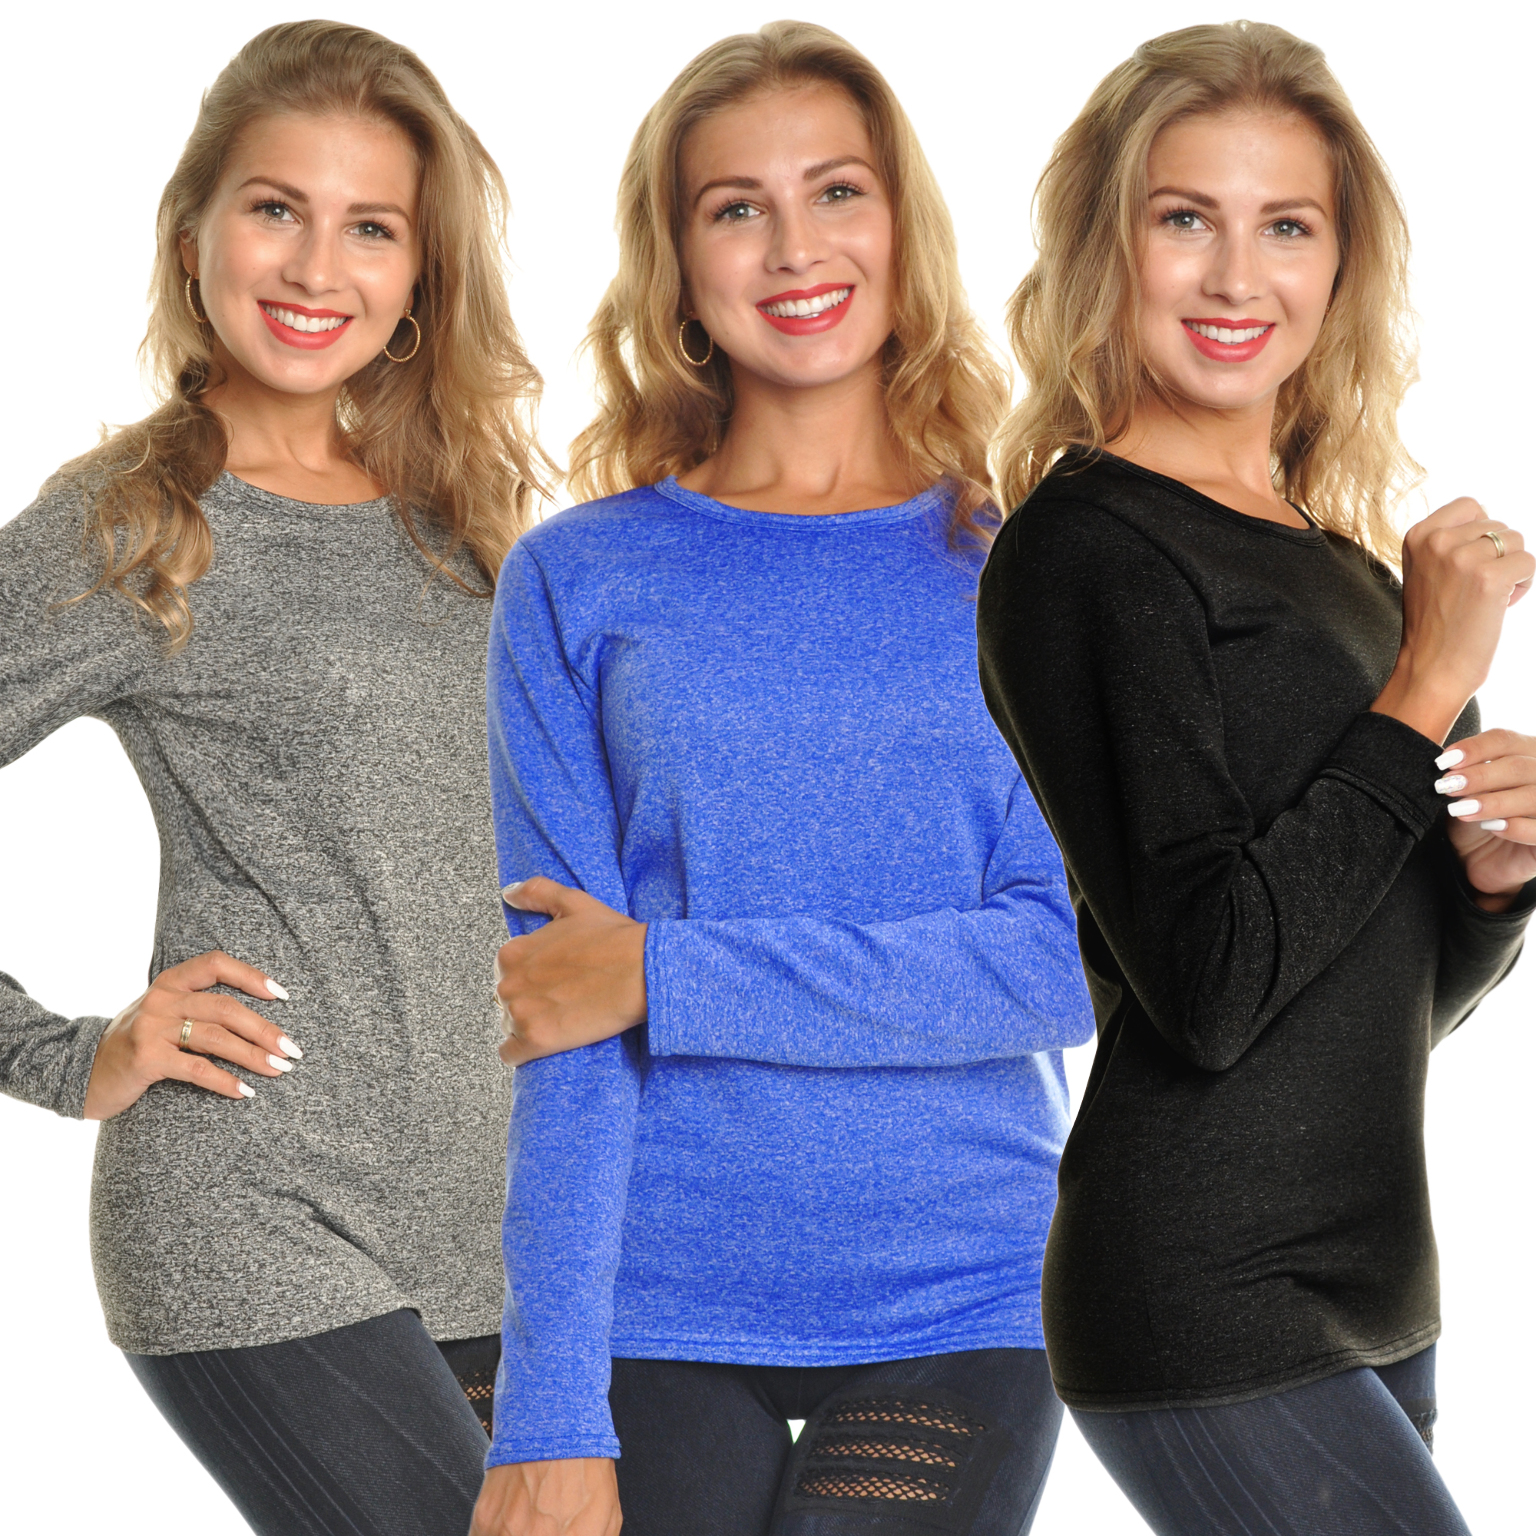 Wholesale Women's Thermal Tops in Marled Colors Size 3X - DollarDays